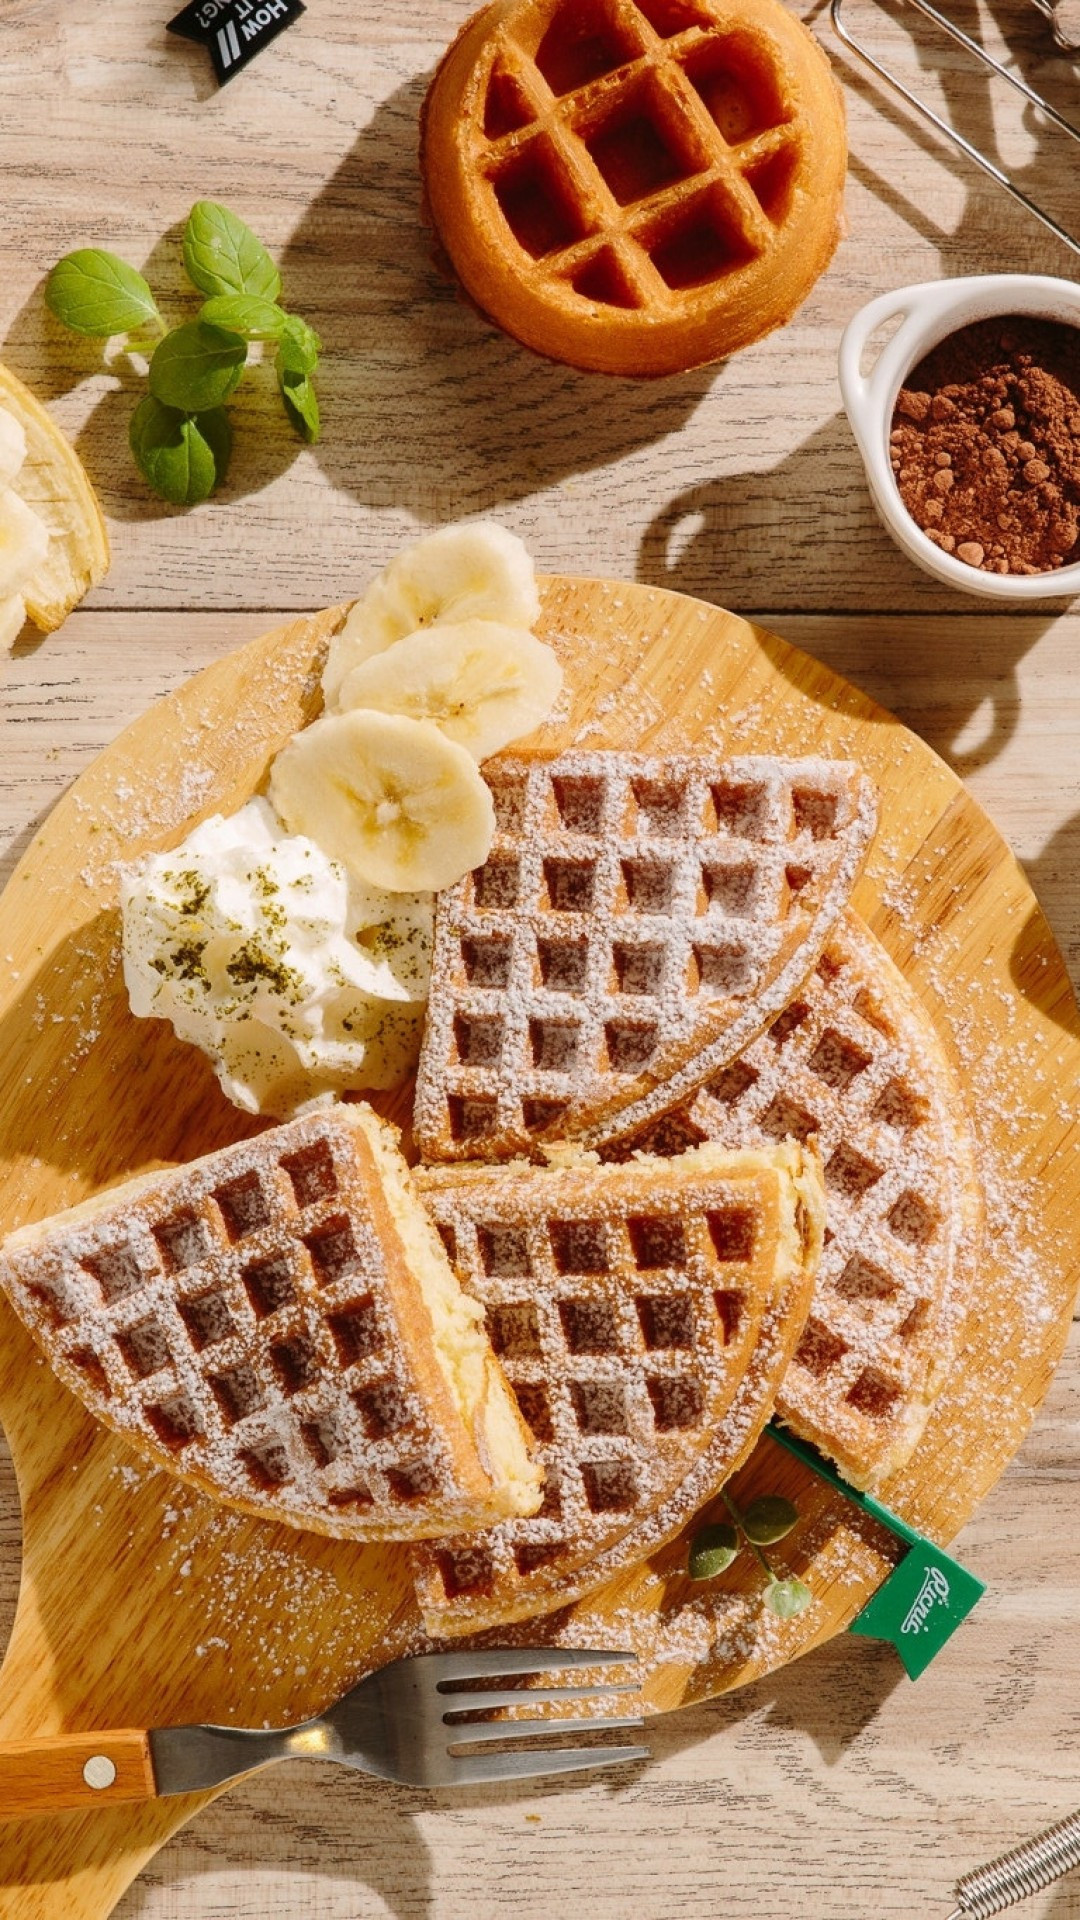 Waffle: The batter-based flat cake, a Belgian culinary specialty. 1080x1920 Full HD Background.